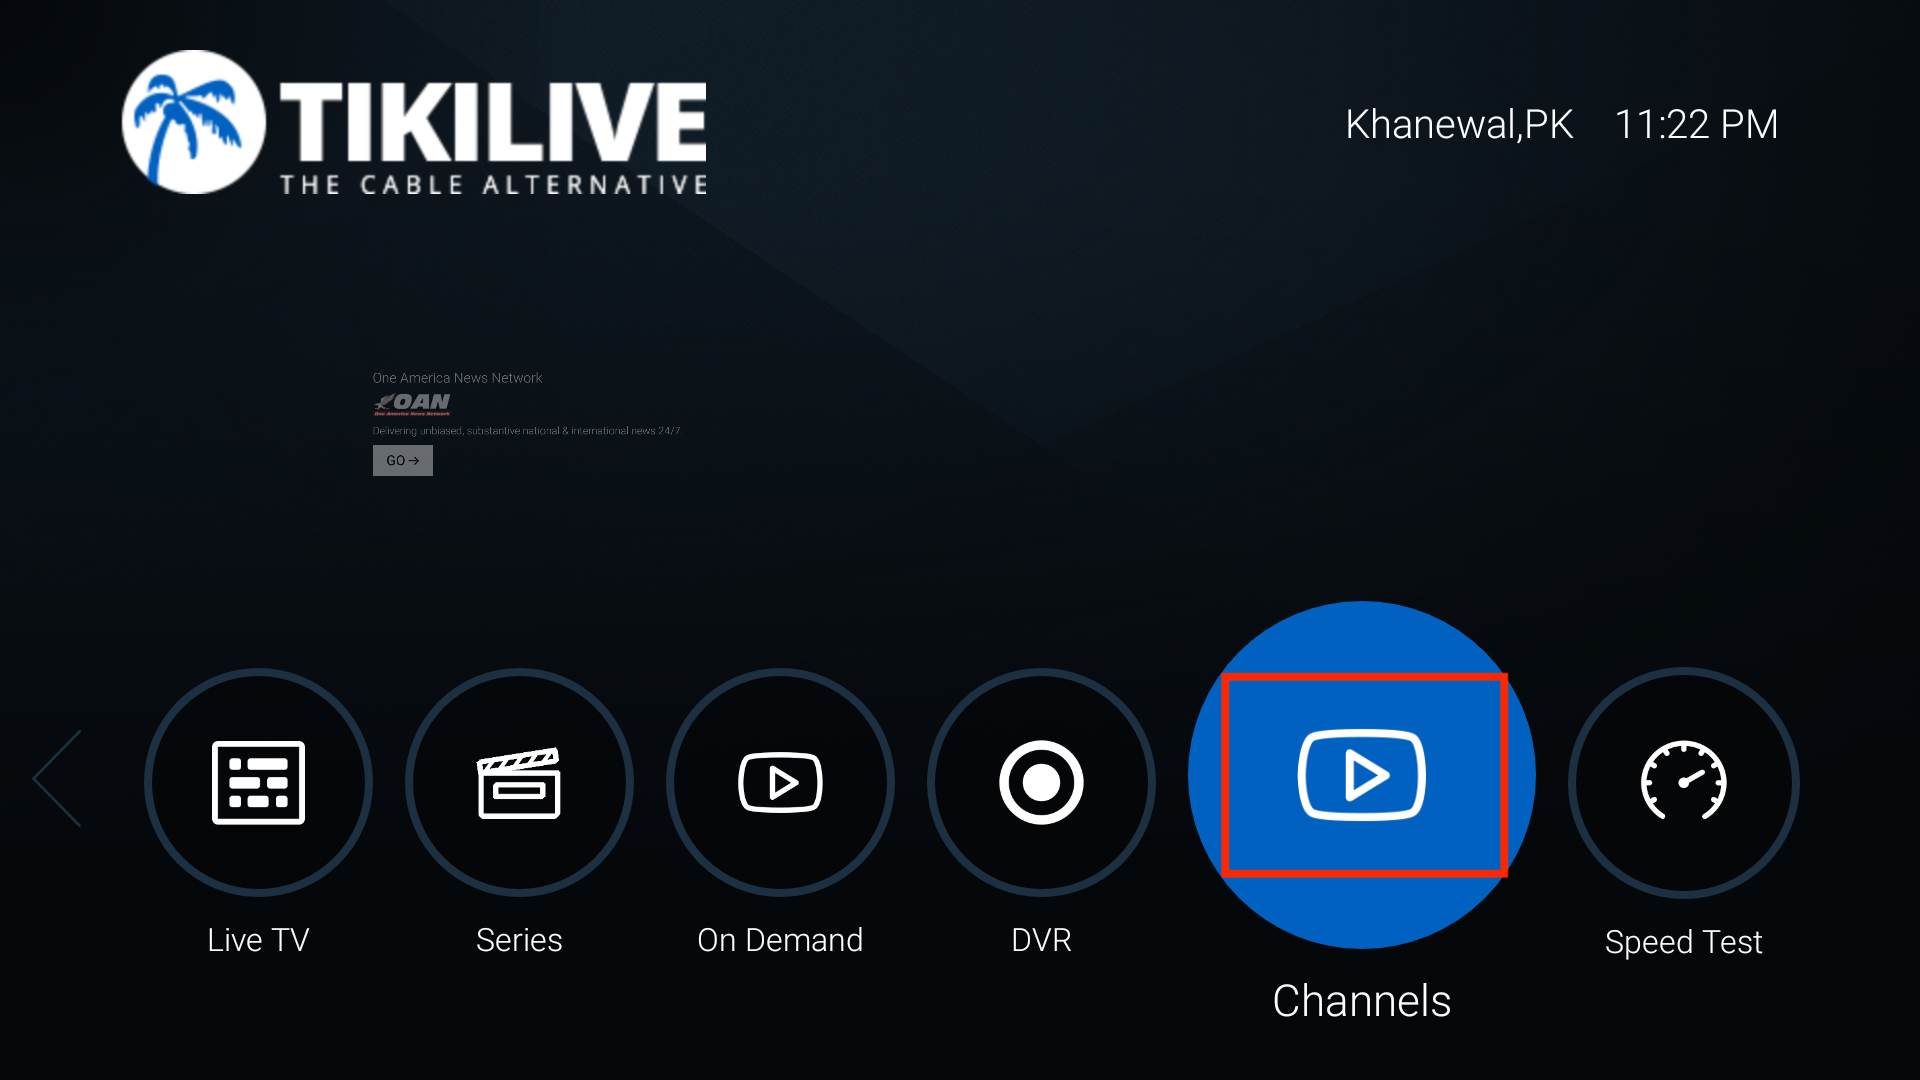 how to install tikilive on firestick